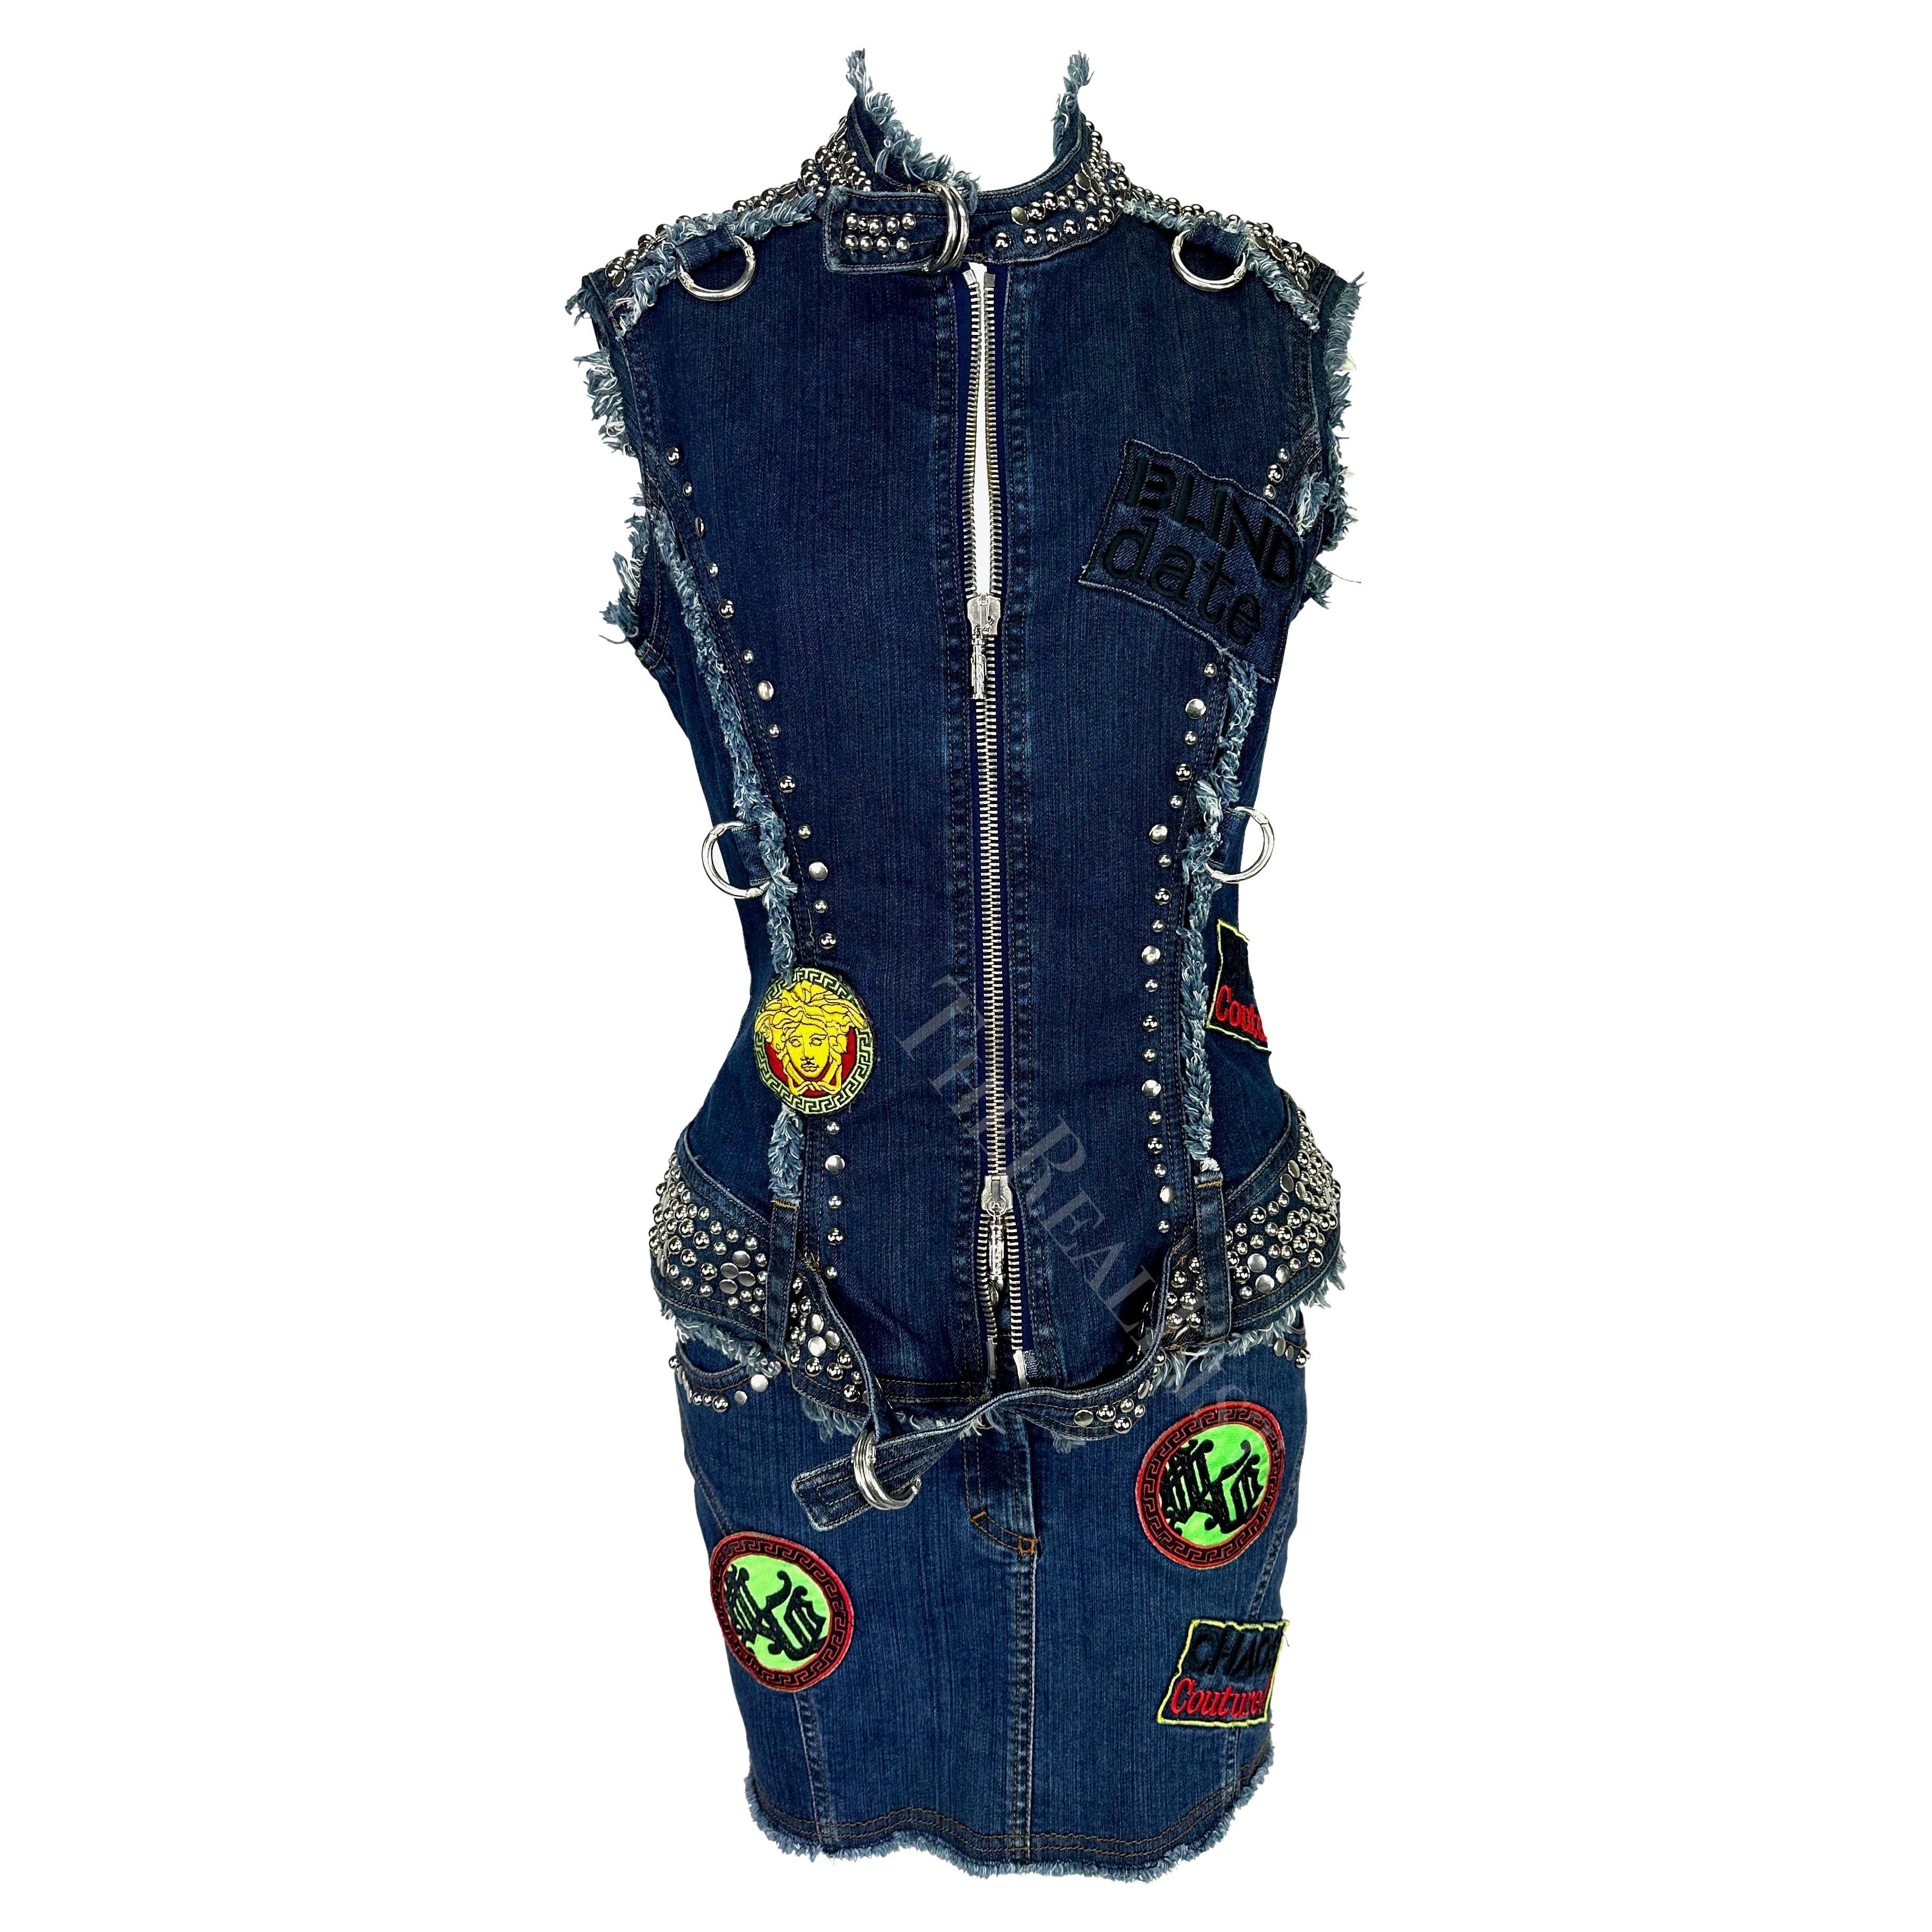 S/S 2005 Versace by Donatella Chaos Couture Studded Denim Patch Vest Skirt Set For Sale 1